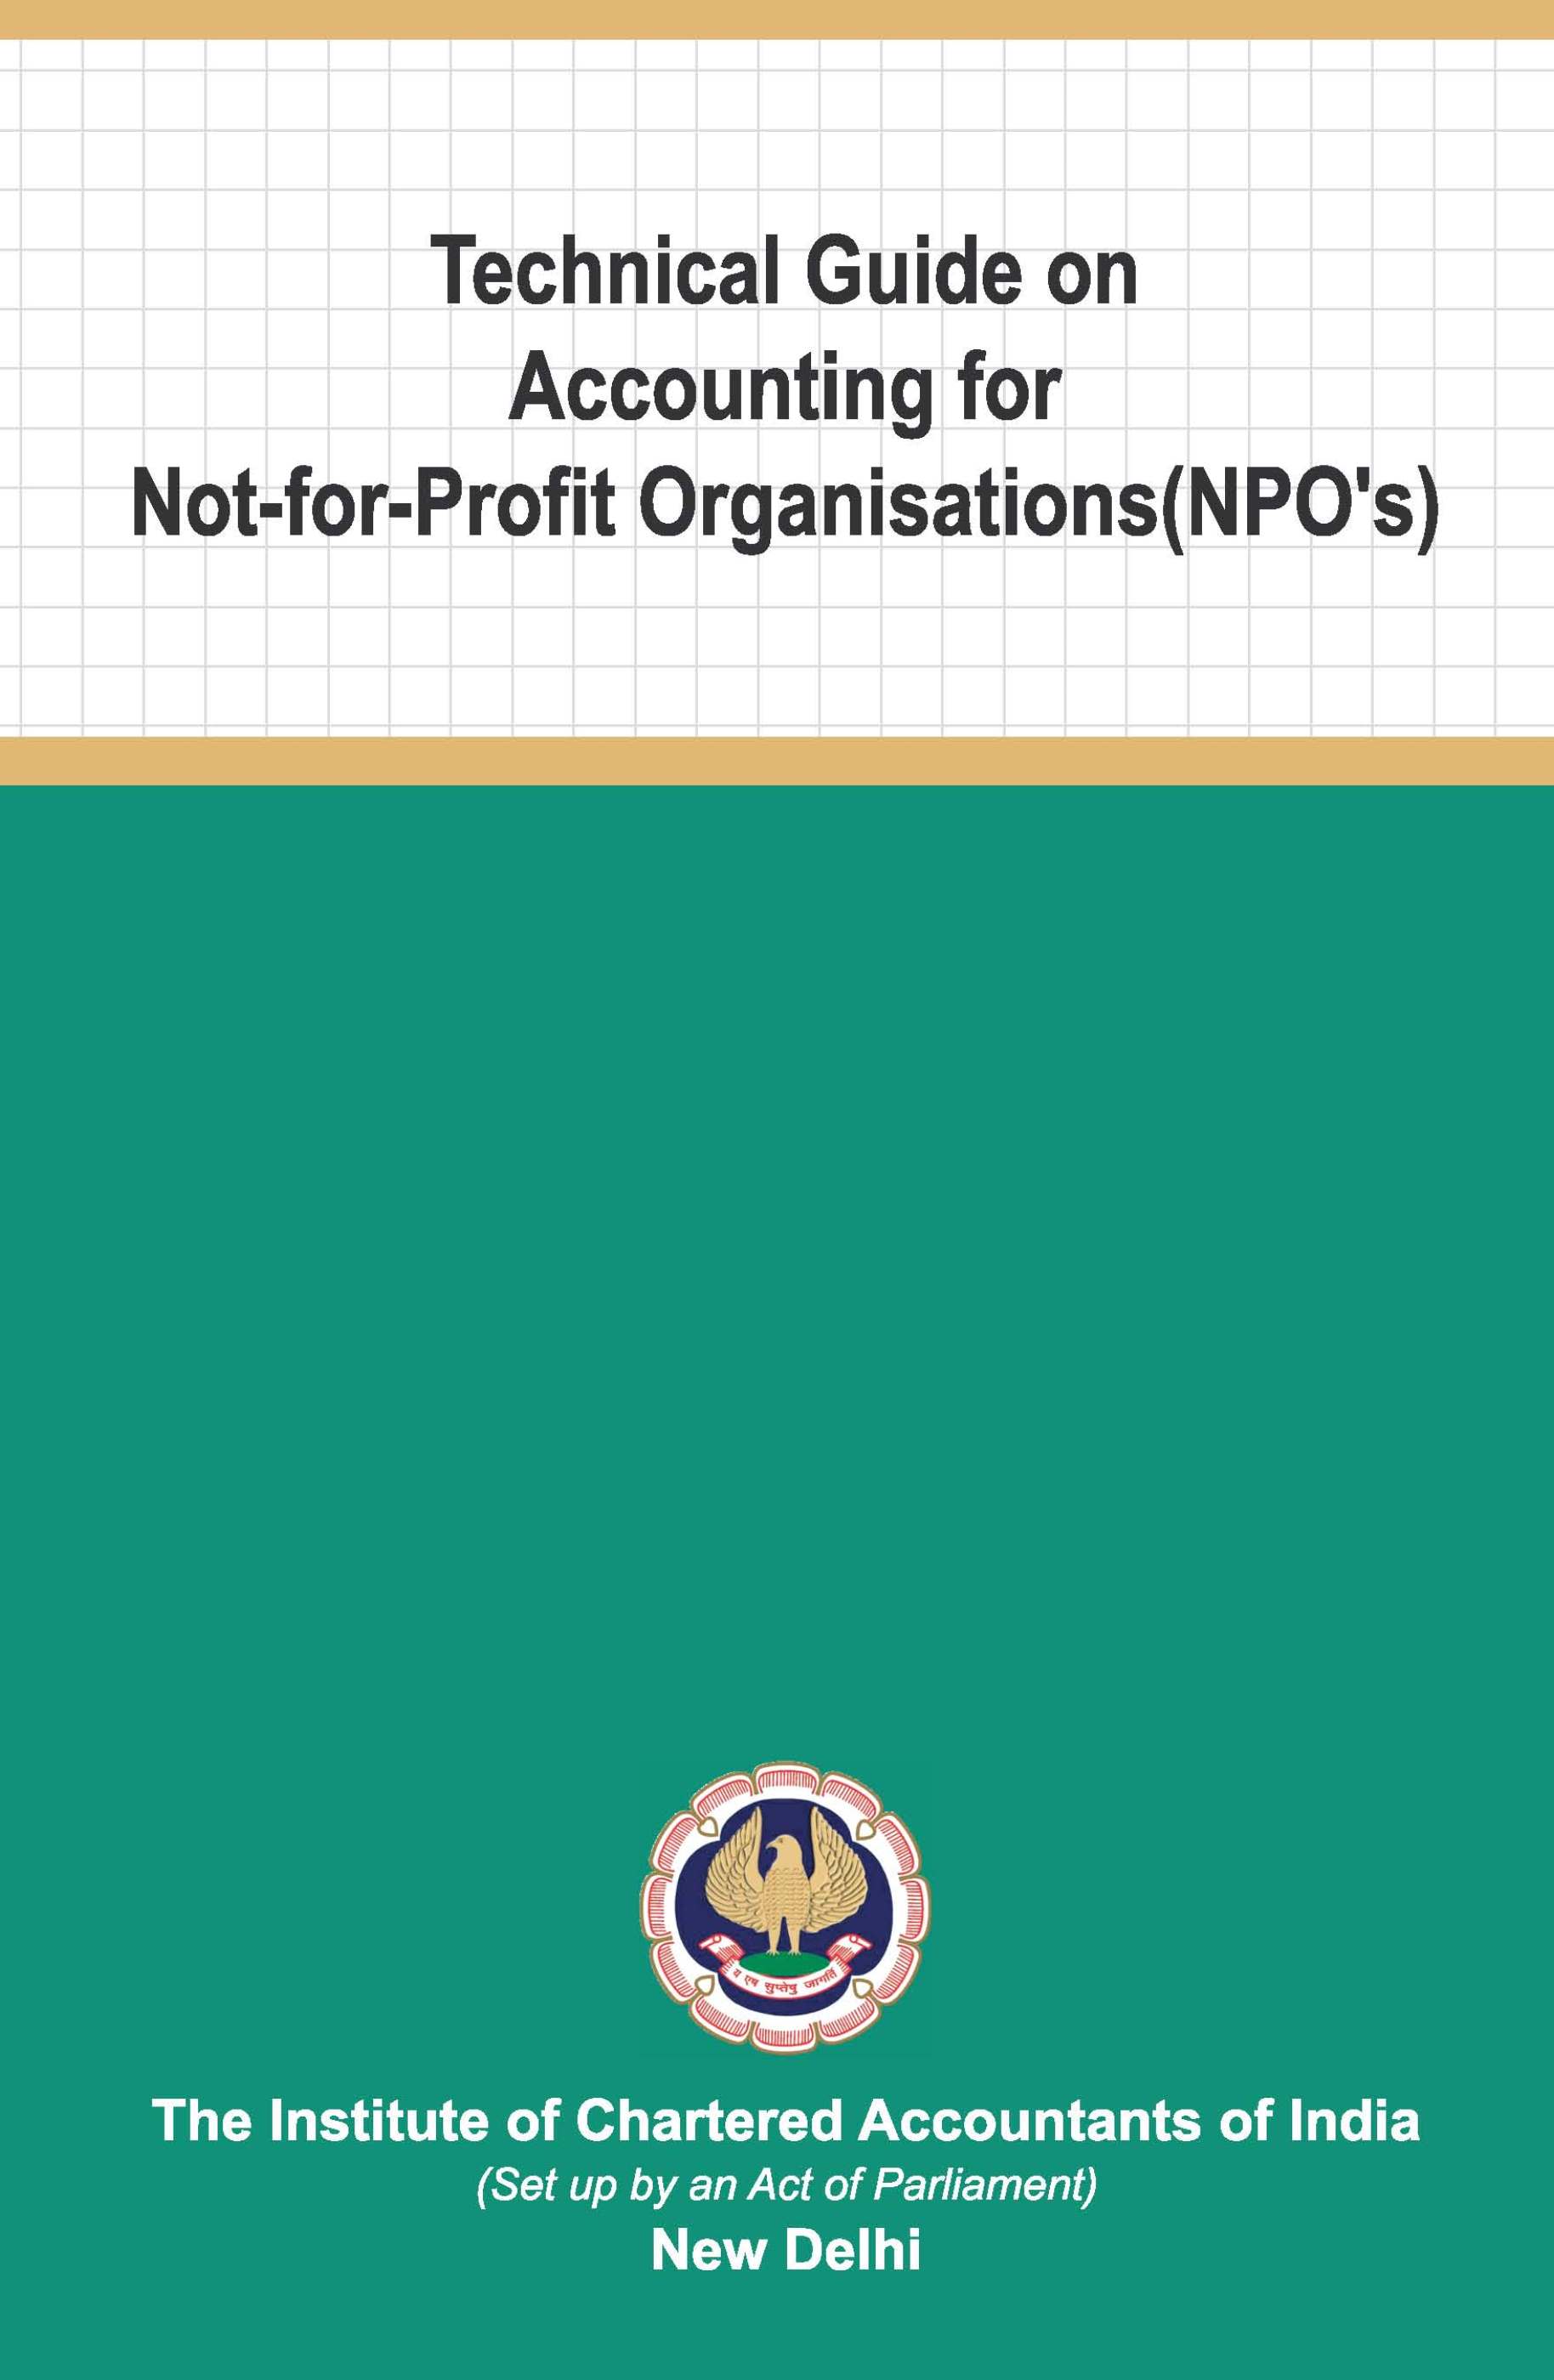 Technical Guide on Accounting for Not-for-Profit Organisations ( NPOs),January, 2022